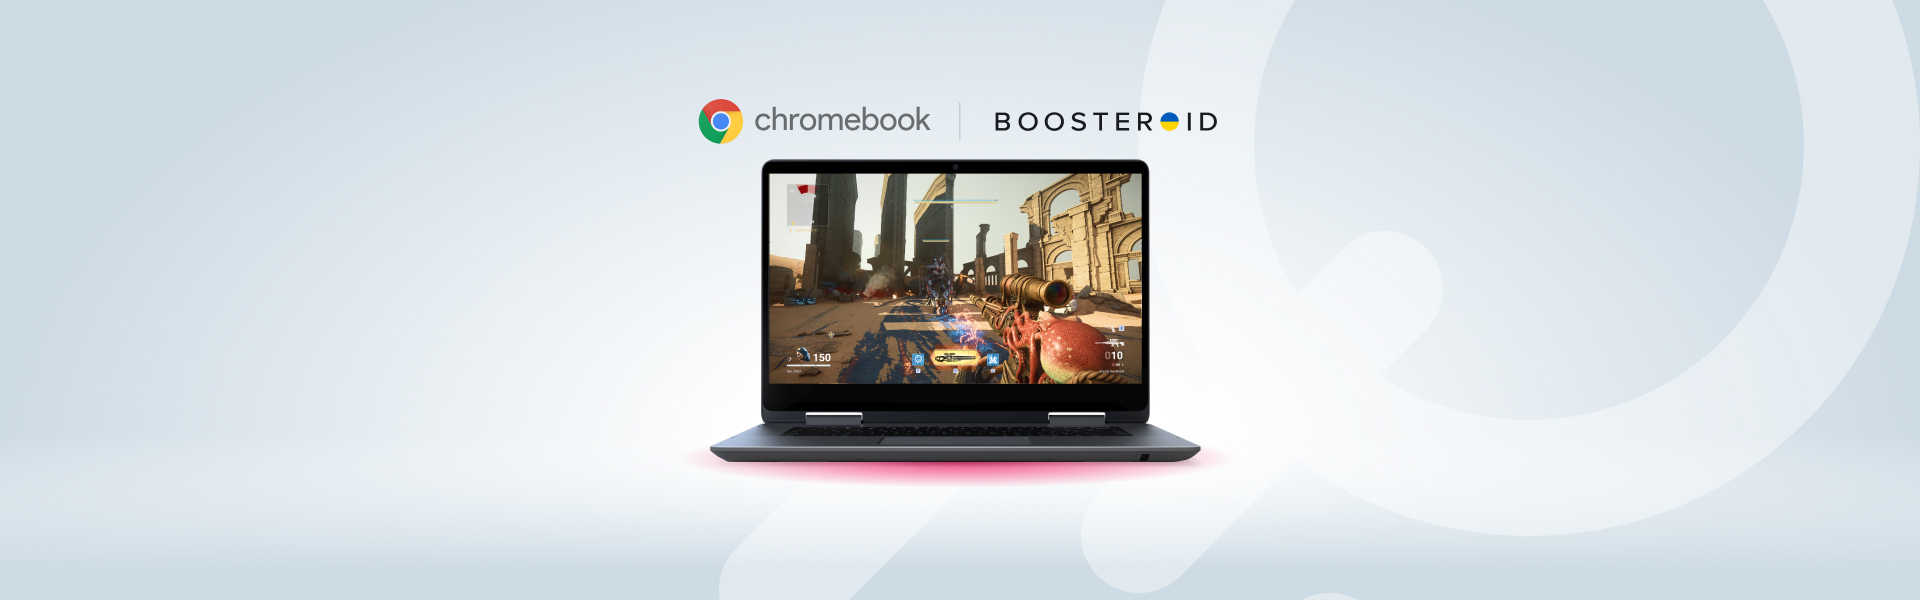 Boosteroid Launches Cloud Gaming on Chromebooks - Boosteroid Blog